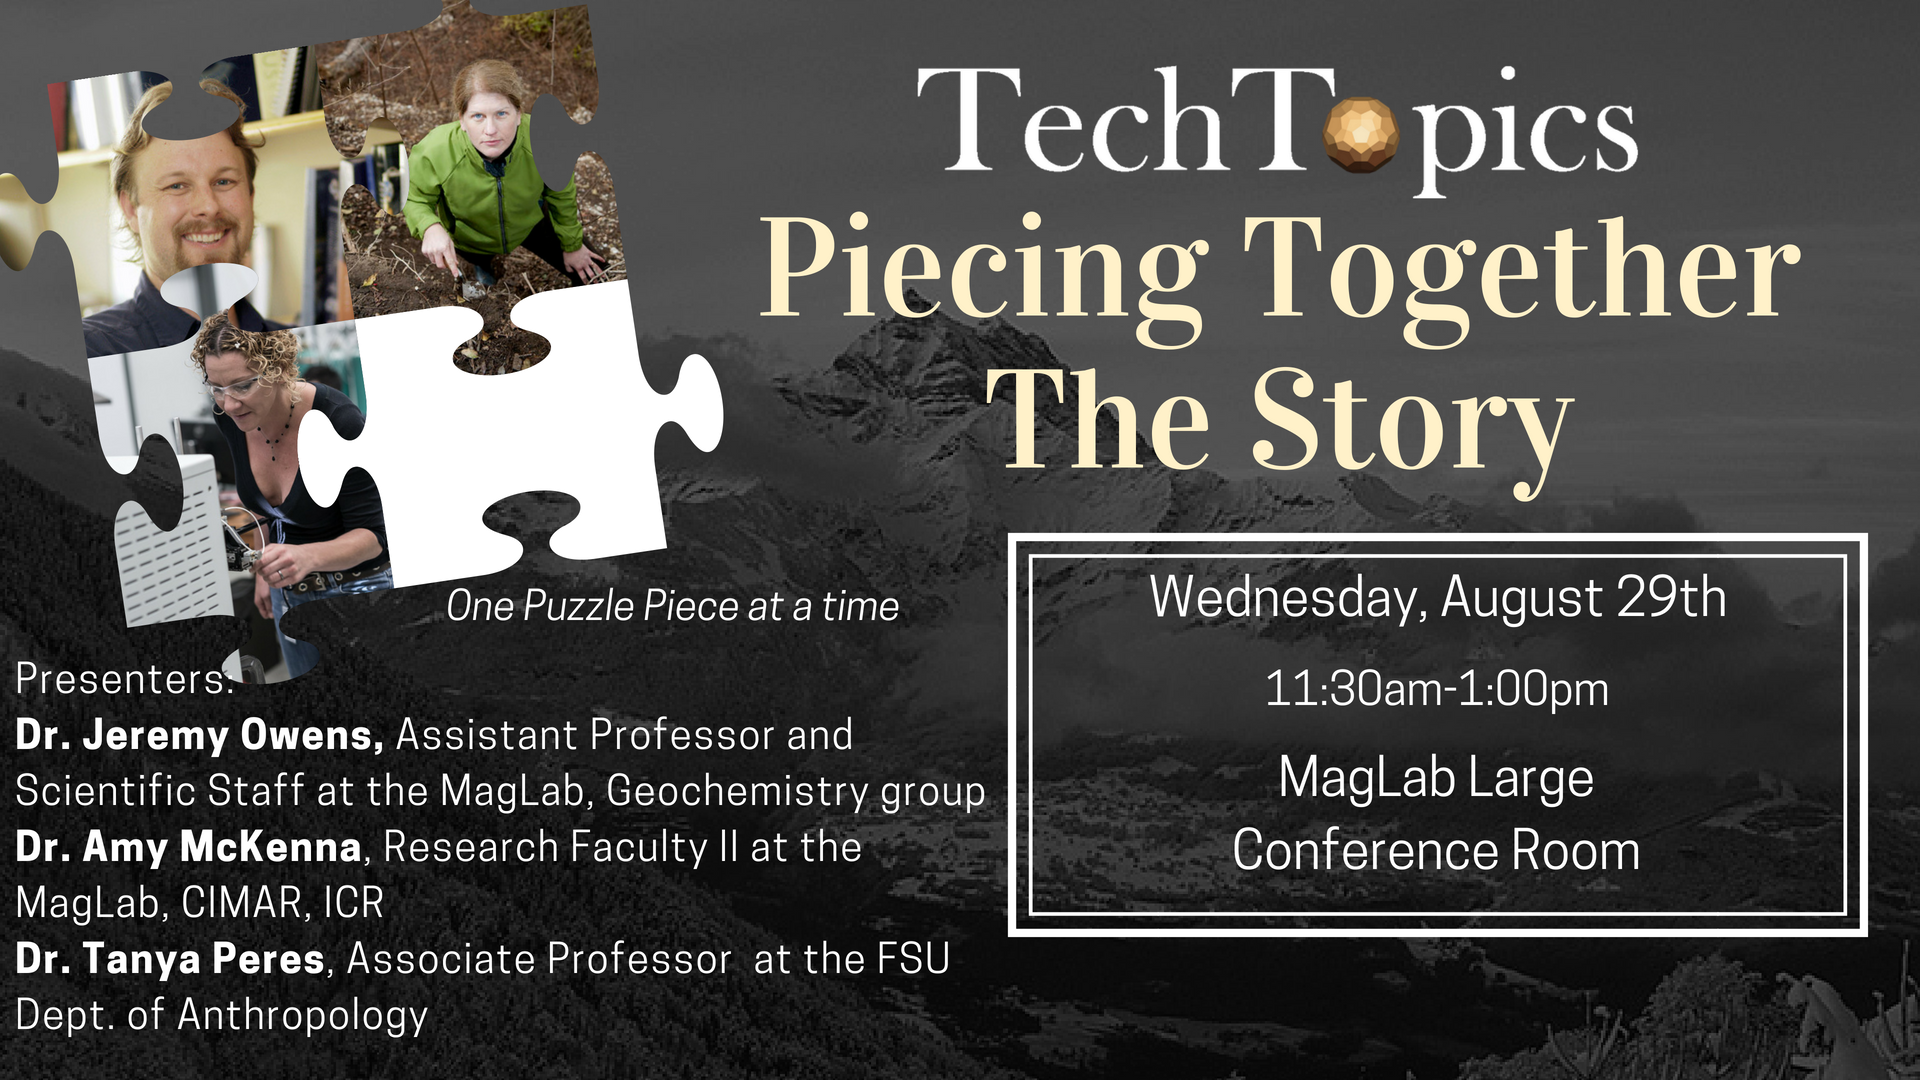 Piecing together the story- Innovation Park of Tallahassee August 2018 TechTopics